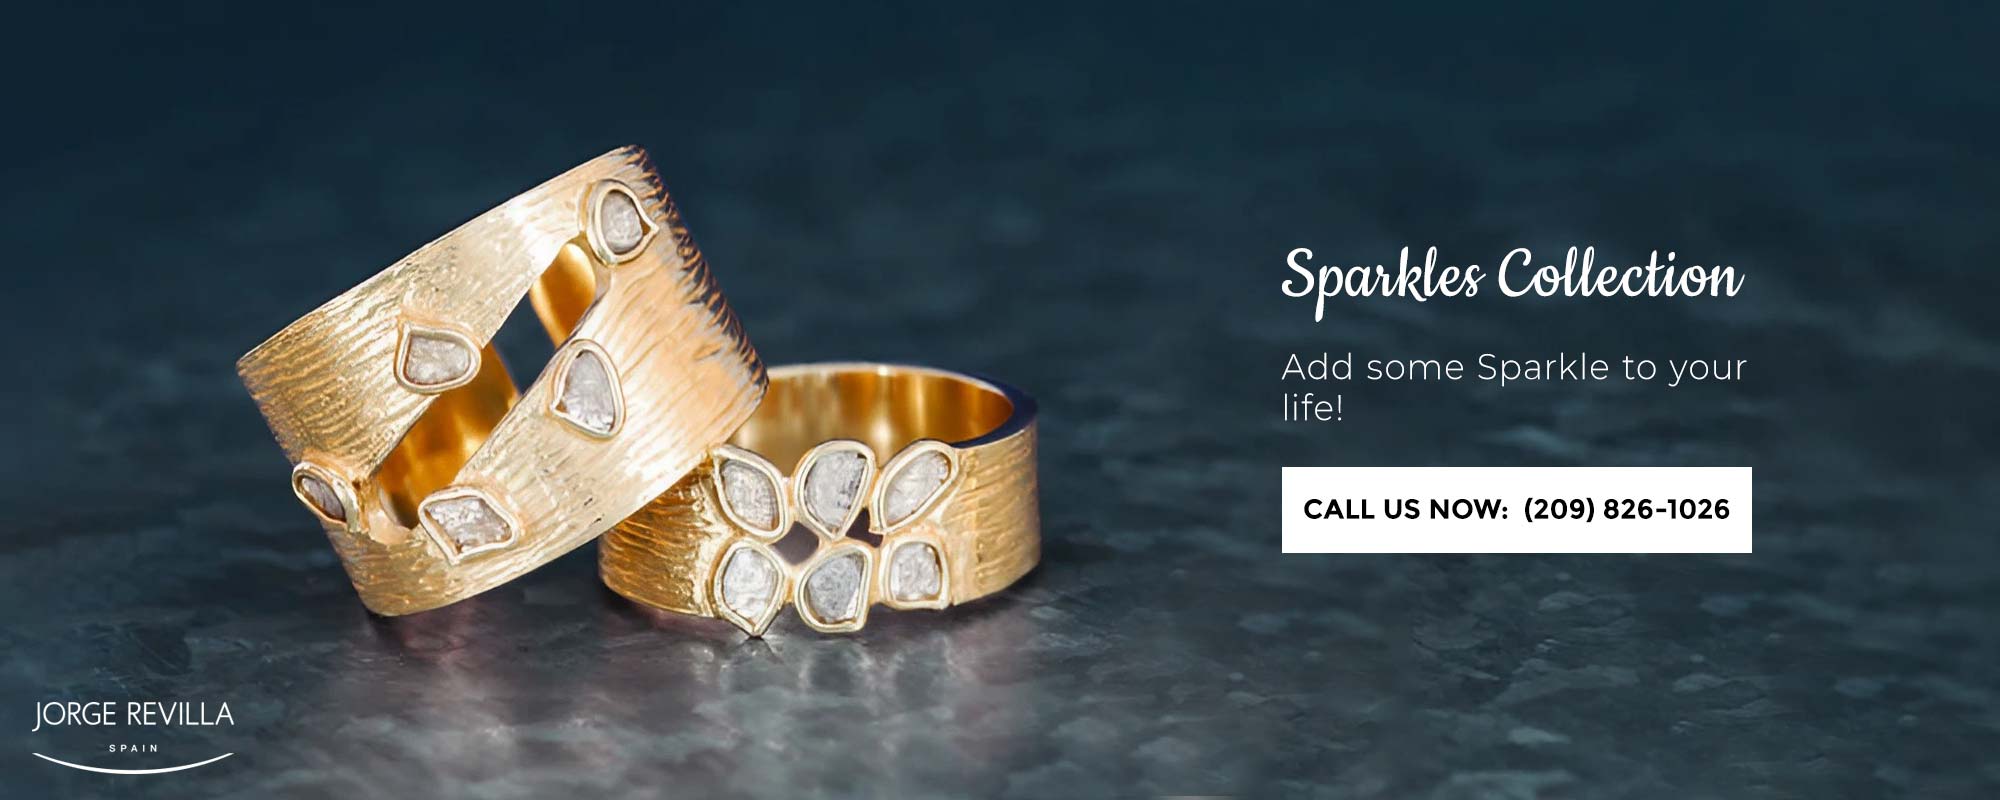 Sparkles Collection At Pearsons Jewelers 1